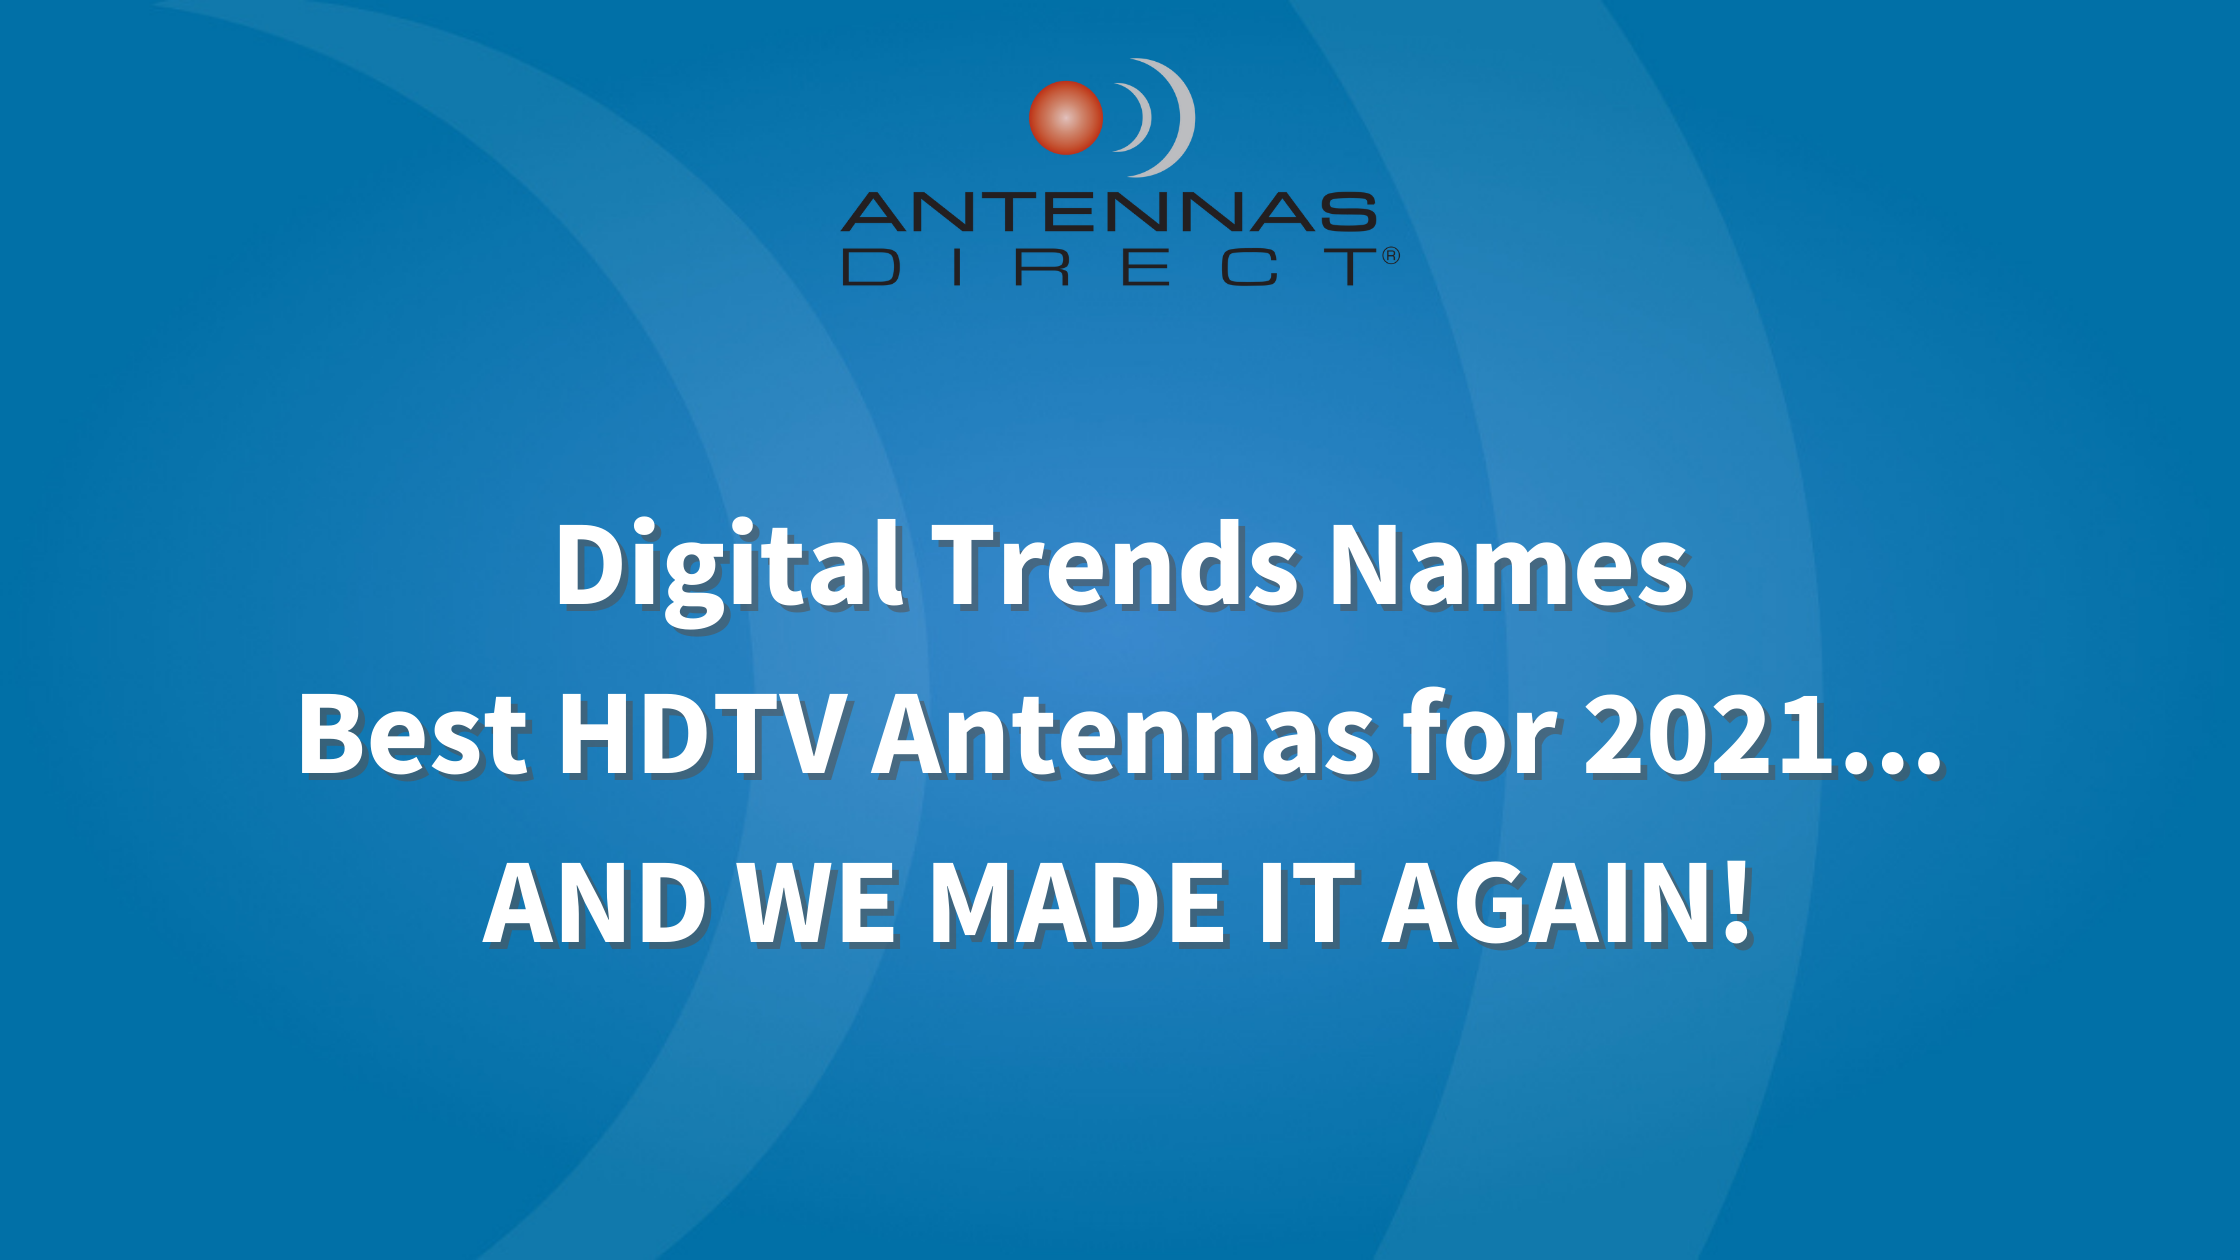 Digital Trends Names Best HDTV Antennas for 2021... and we made it again! Antennas Direct